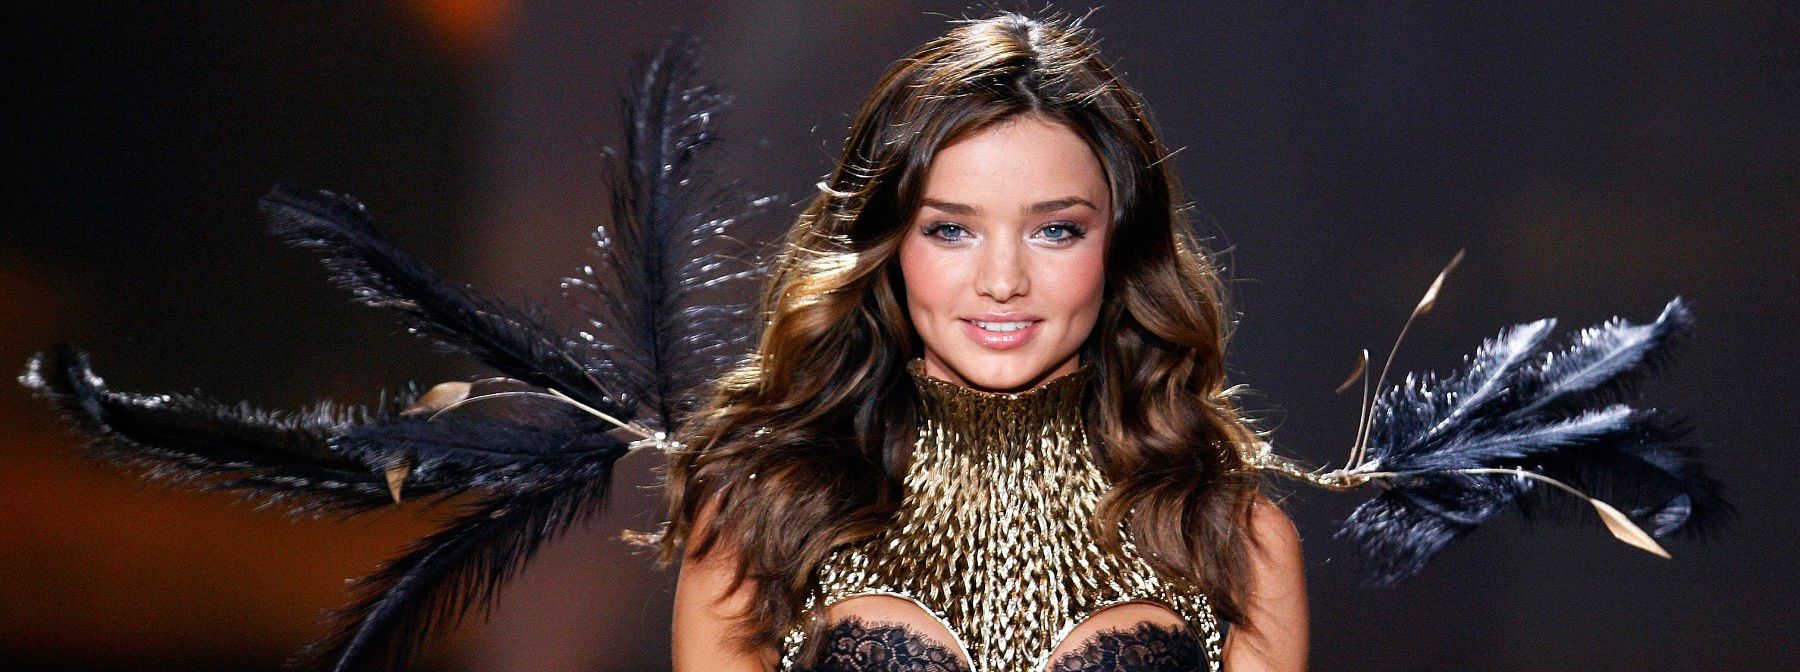 The 10 Most Beautiful Models In The World Therichest